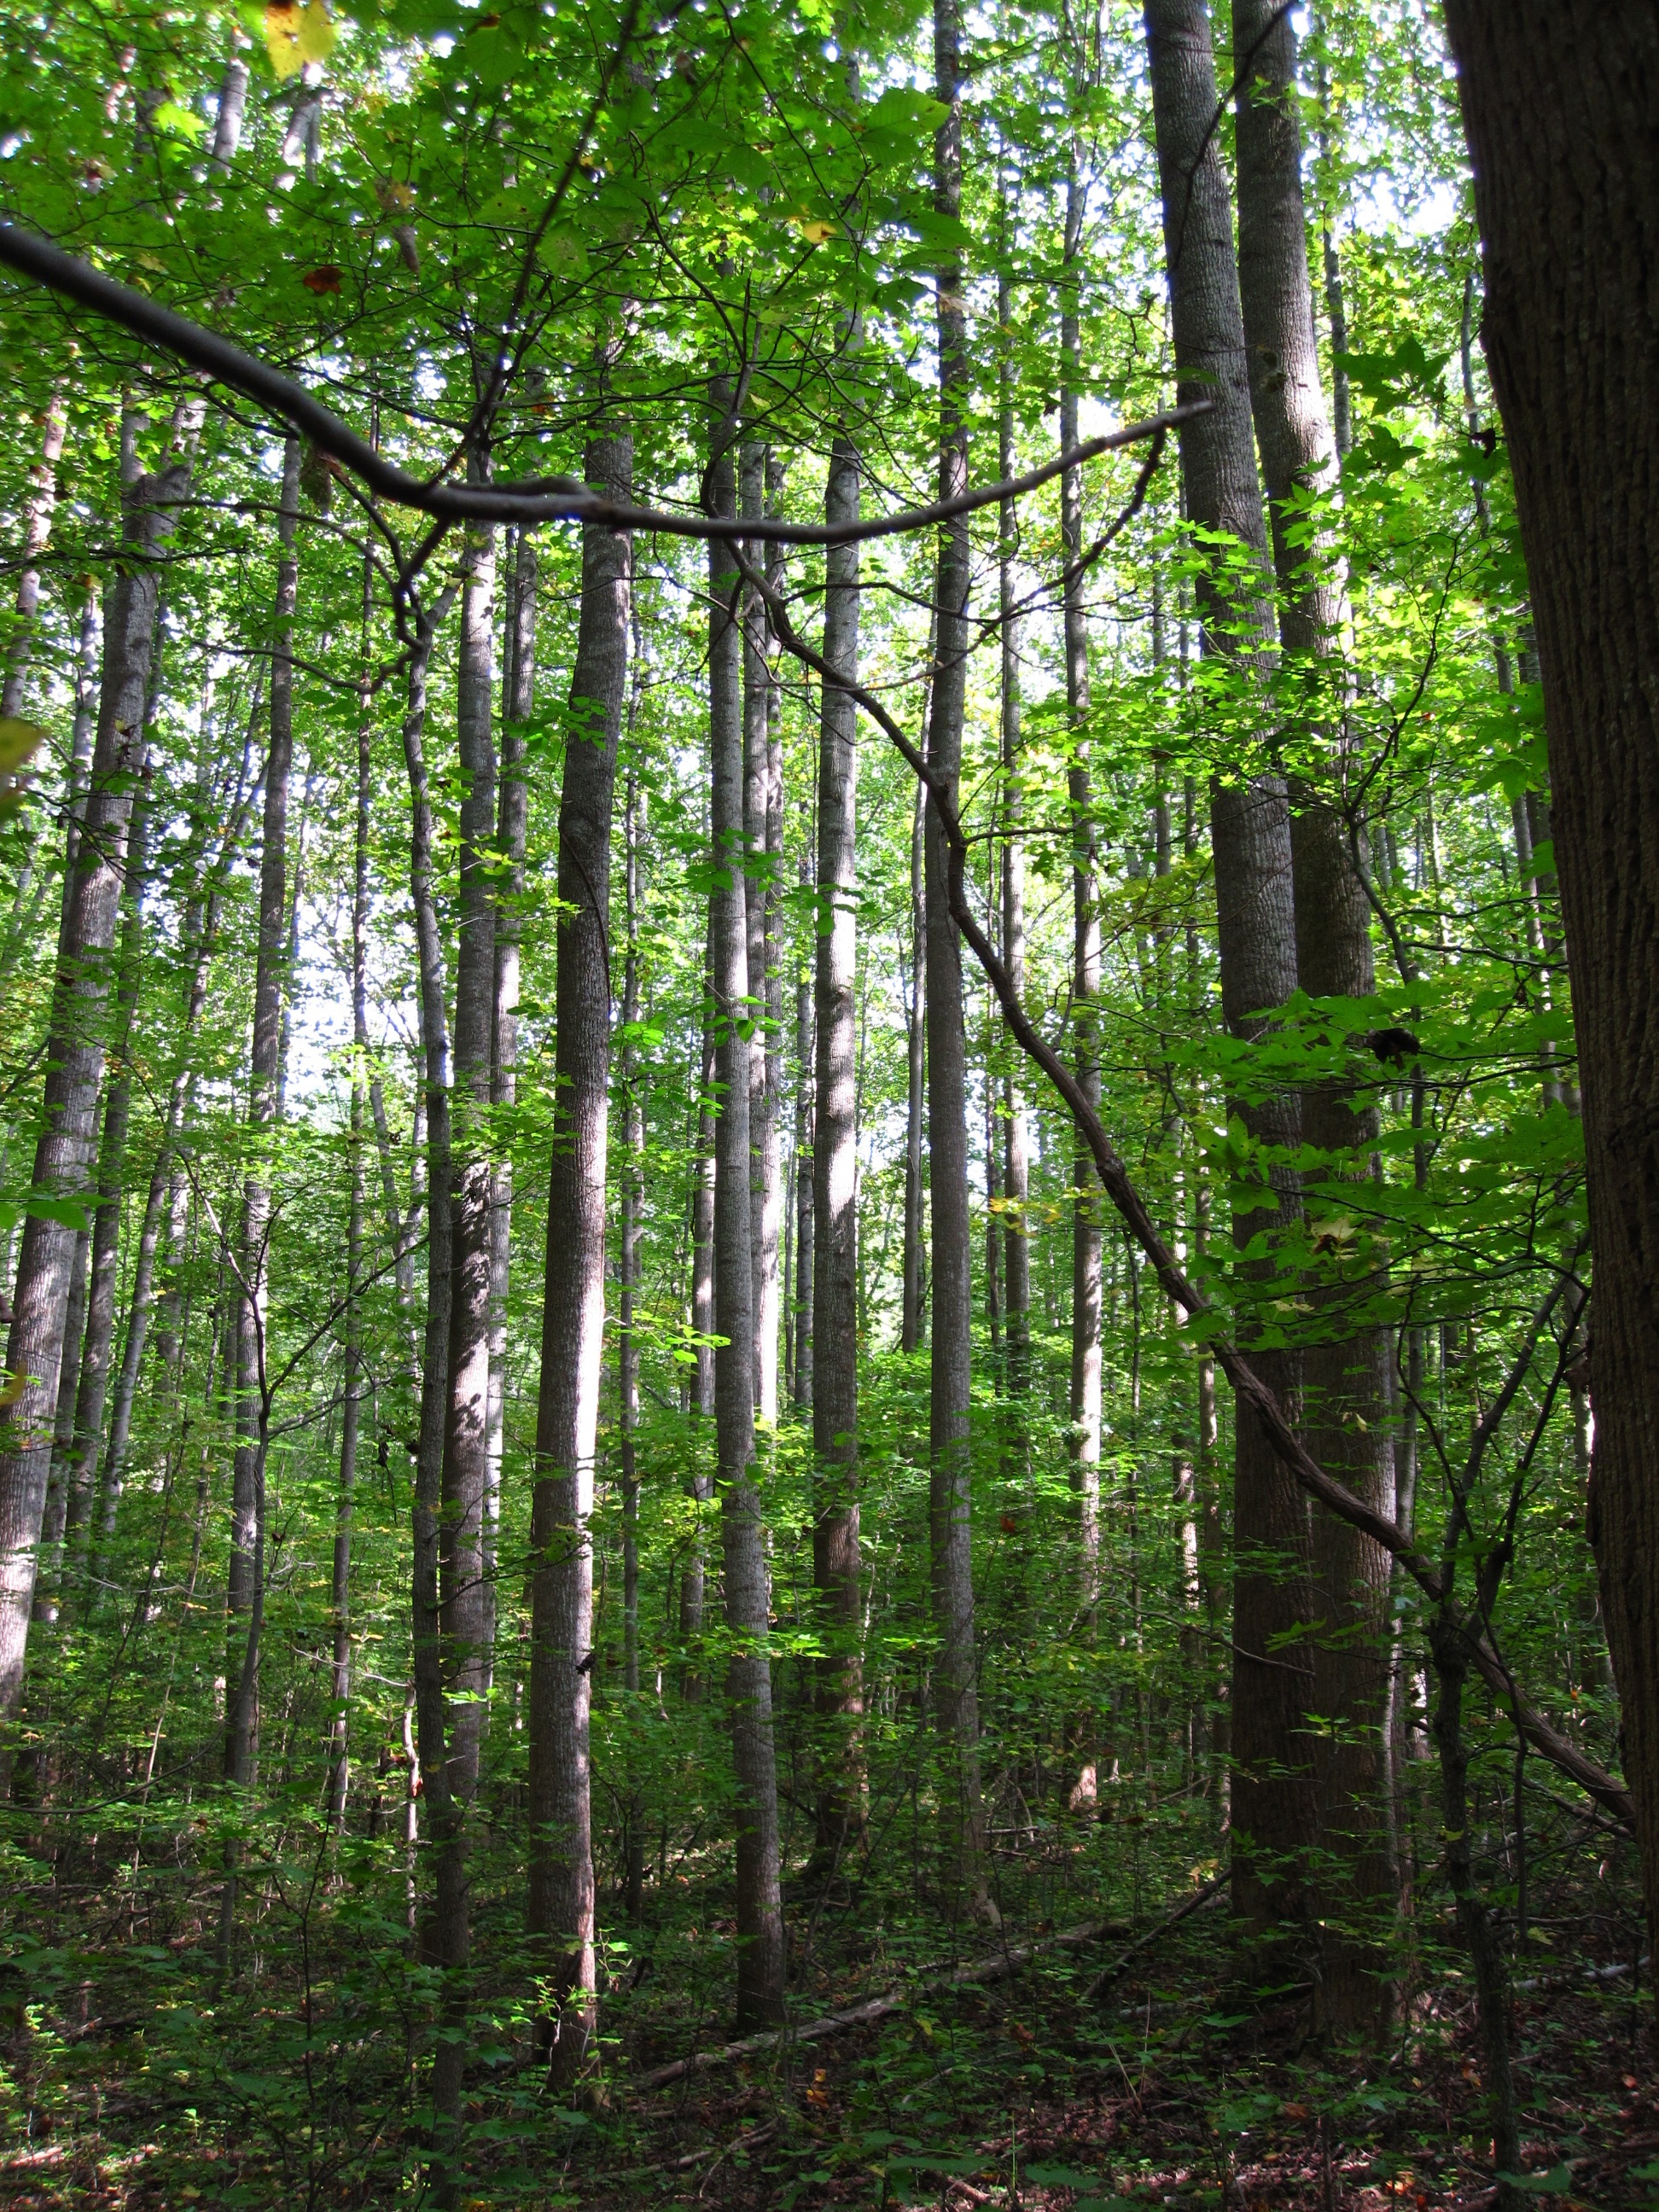 St. Charles, MD has received SFI Forestry Certification for its careful management of its forested areas.